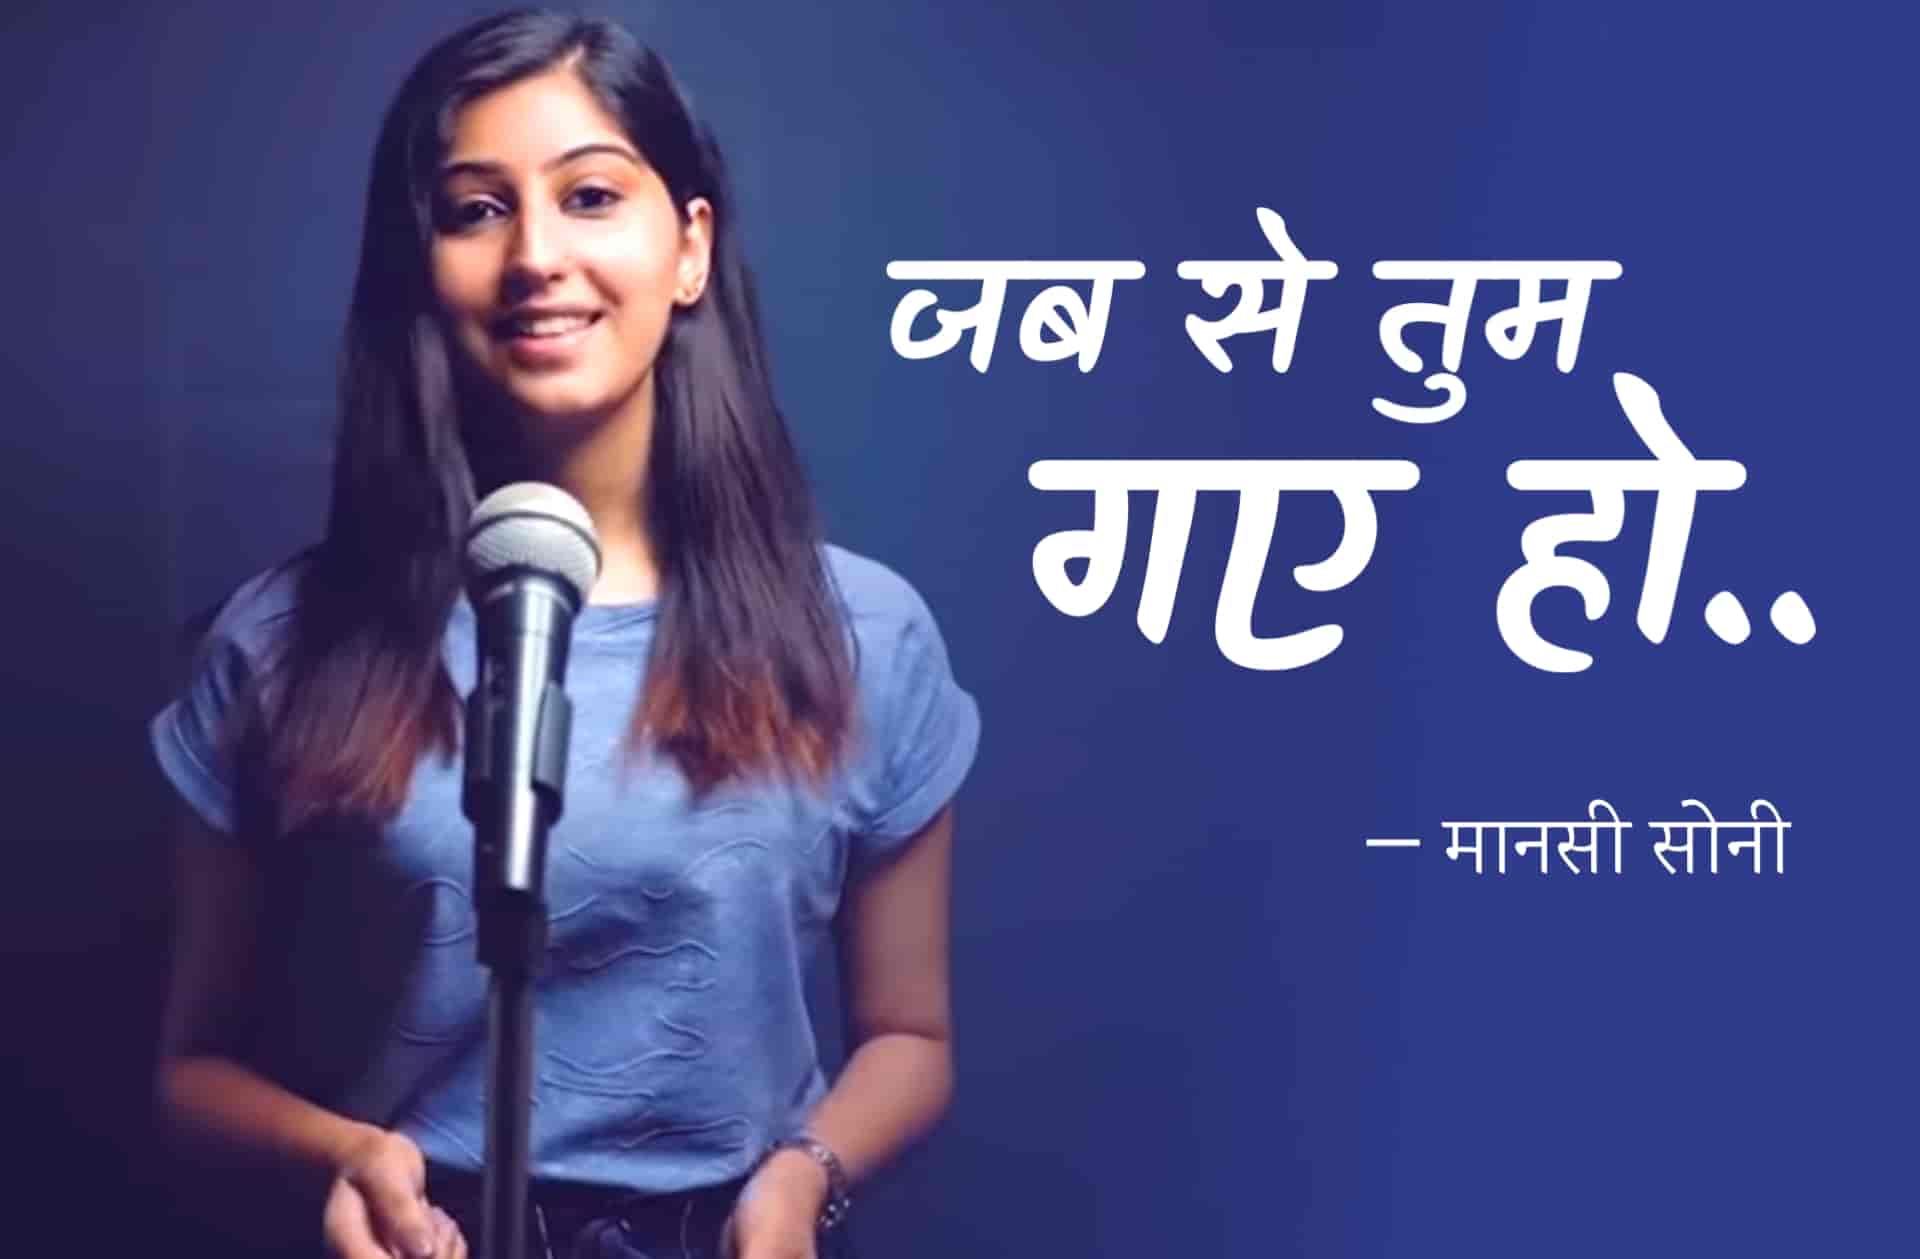 This beautiful poetry 'Jab Se Tum Gaye Ho', written by Mansi Soni, makes this poetry feel like an experience when someone leaves someone and realizes